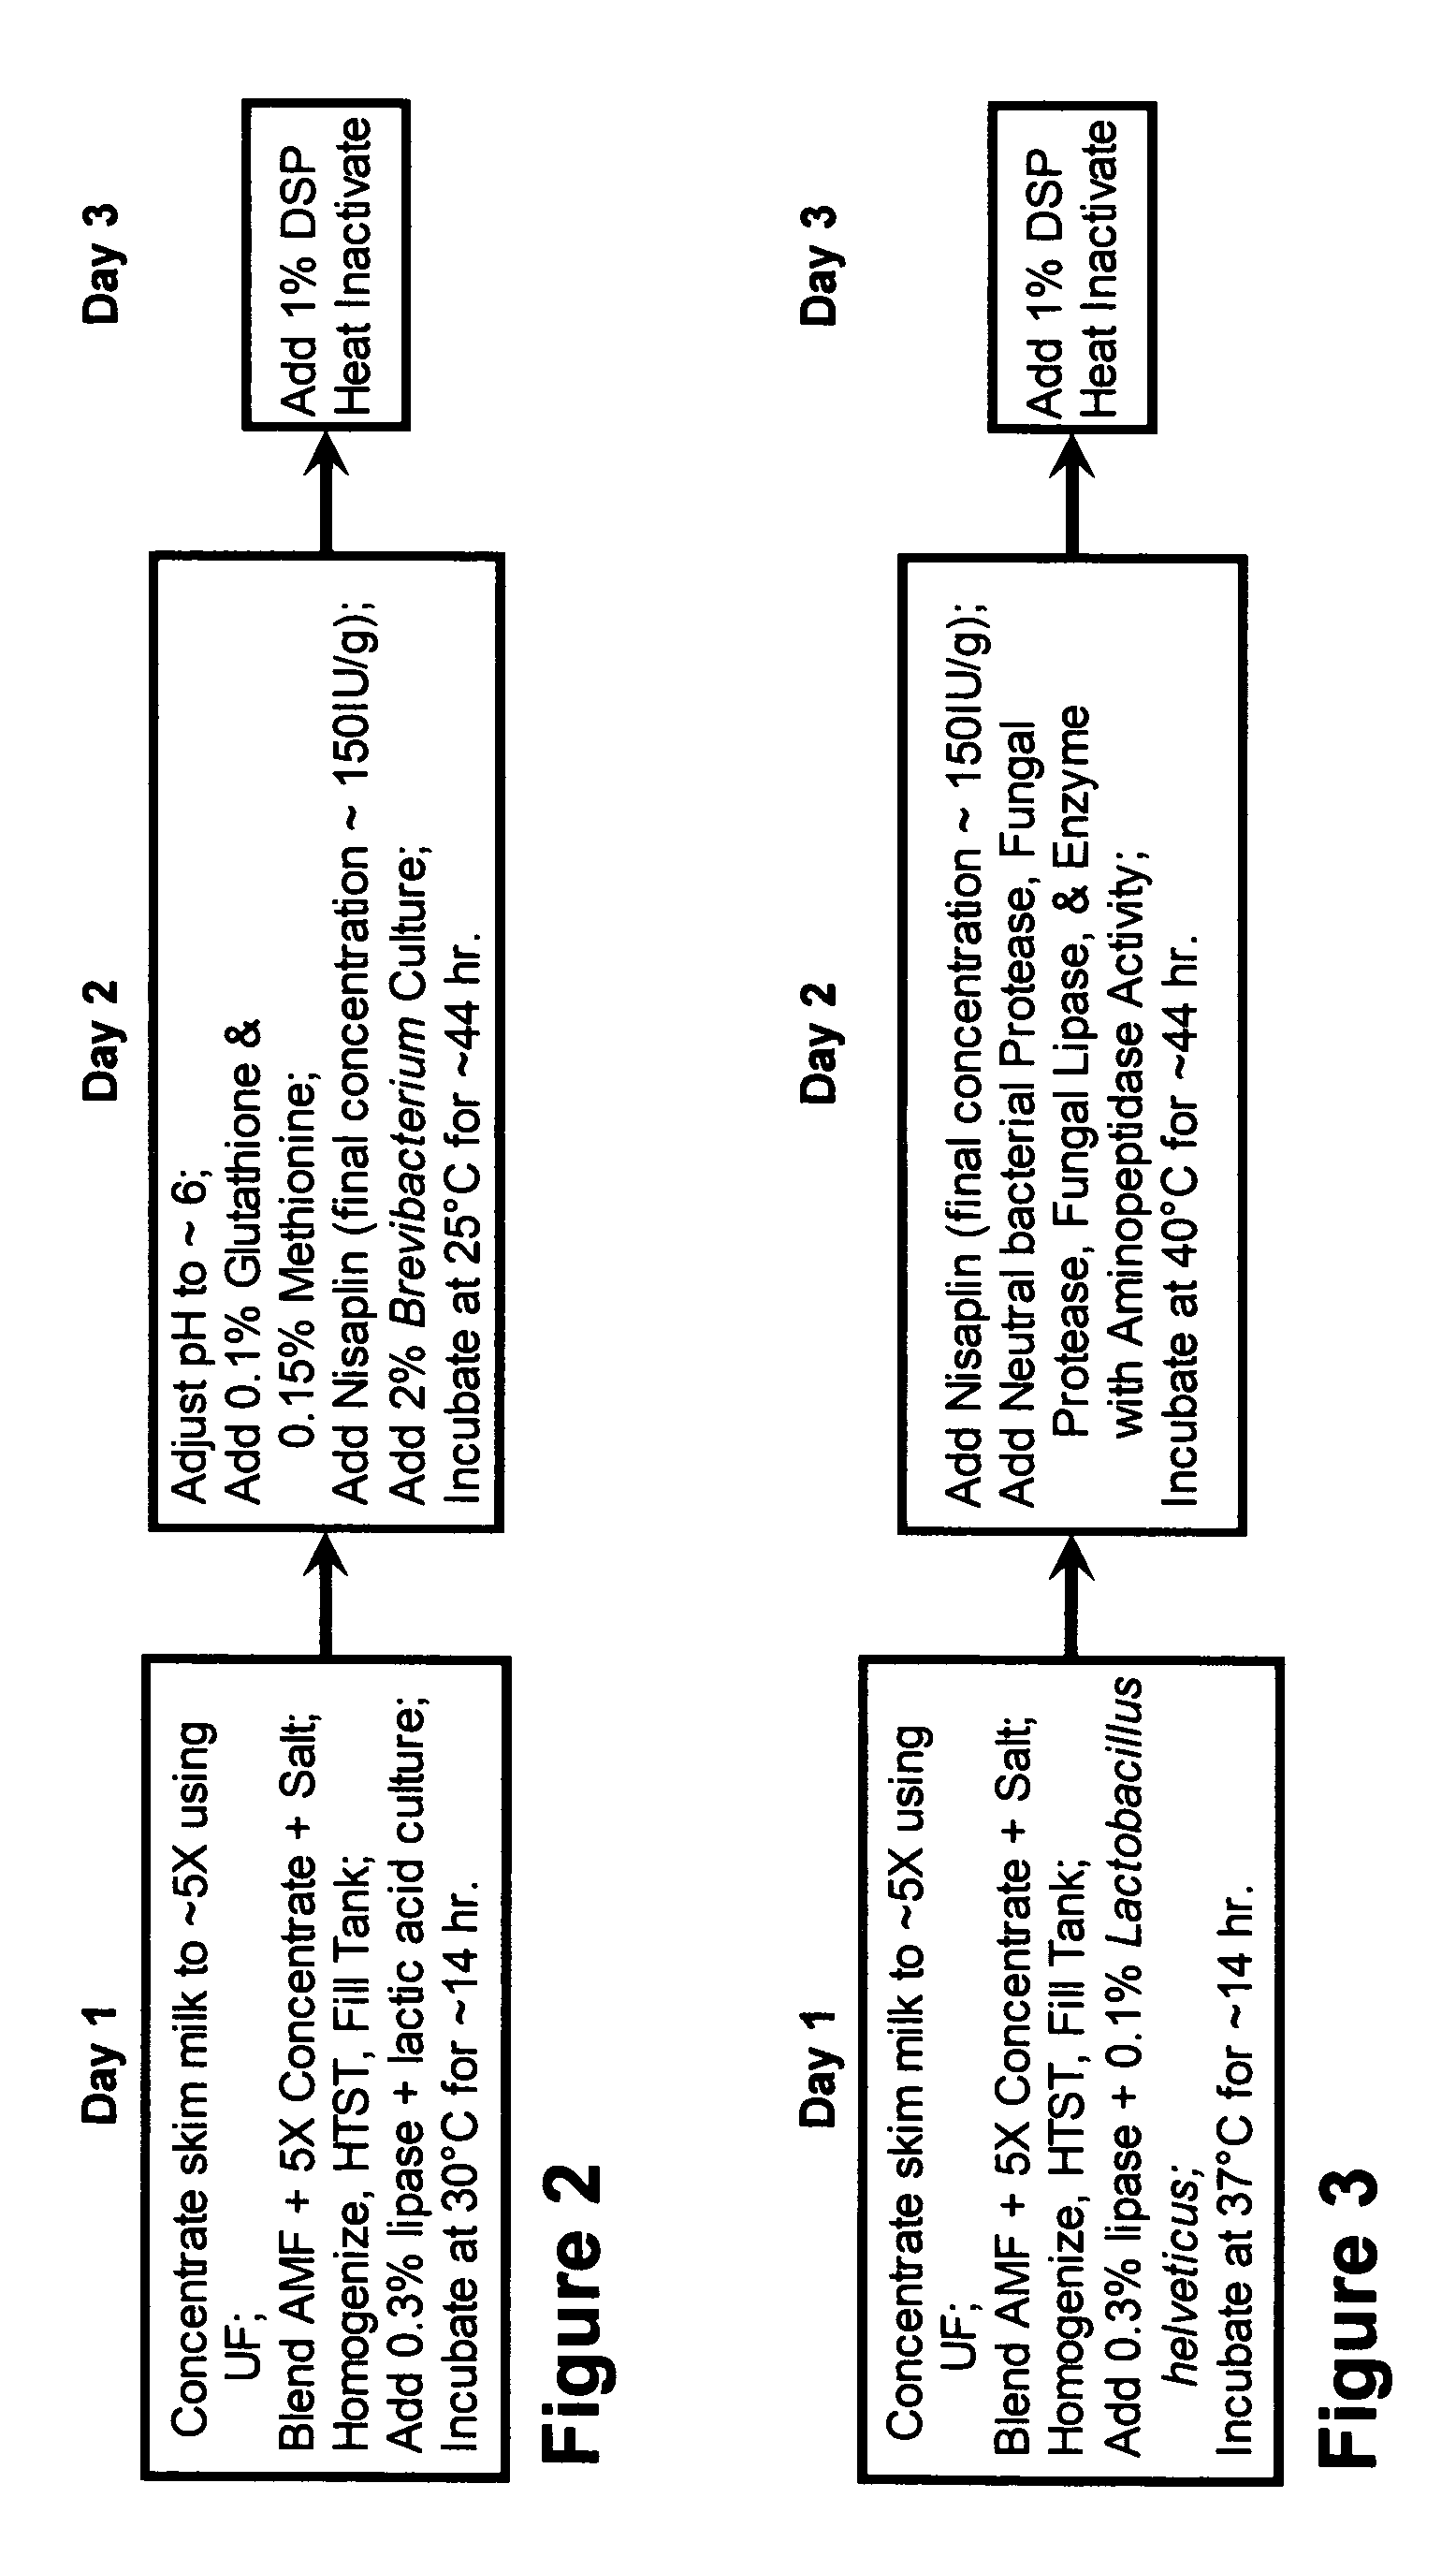 Cheese flavoring systems prepared with bacteriocins